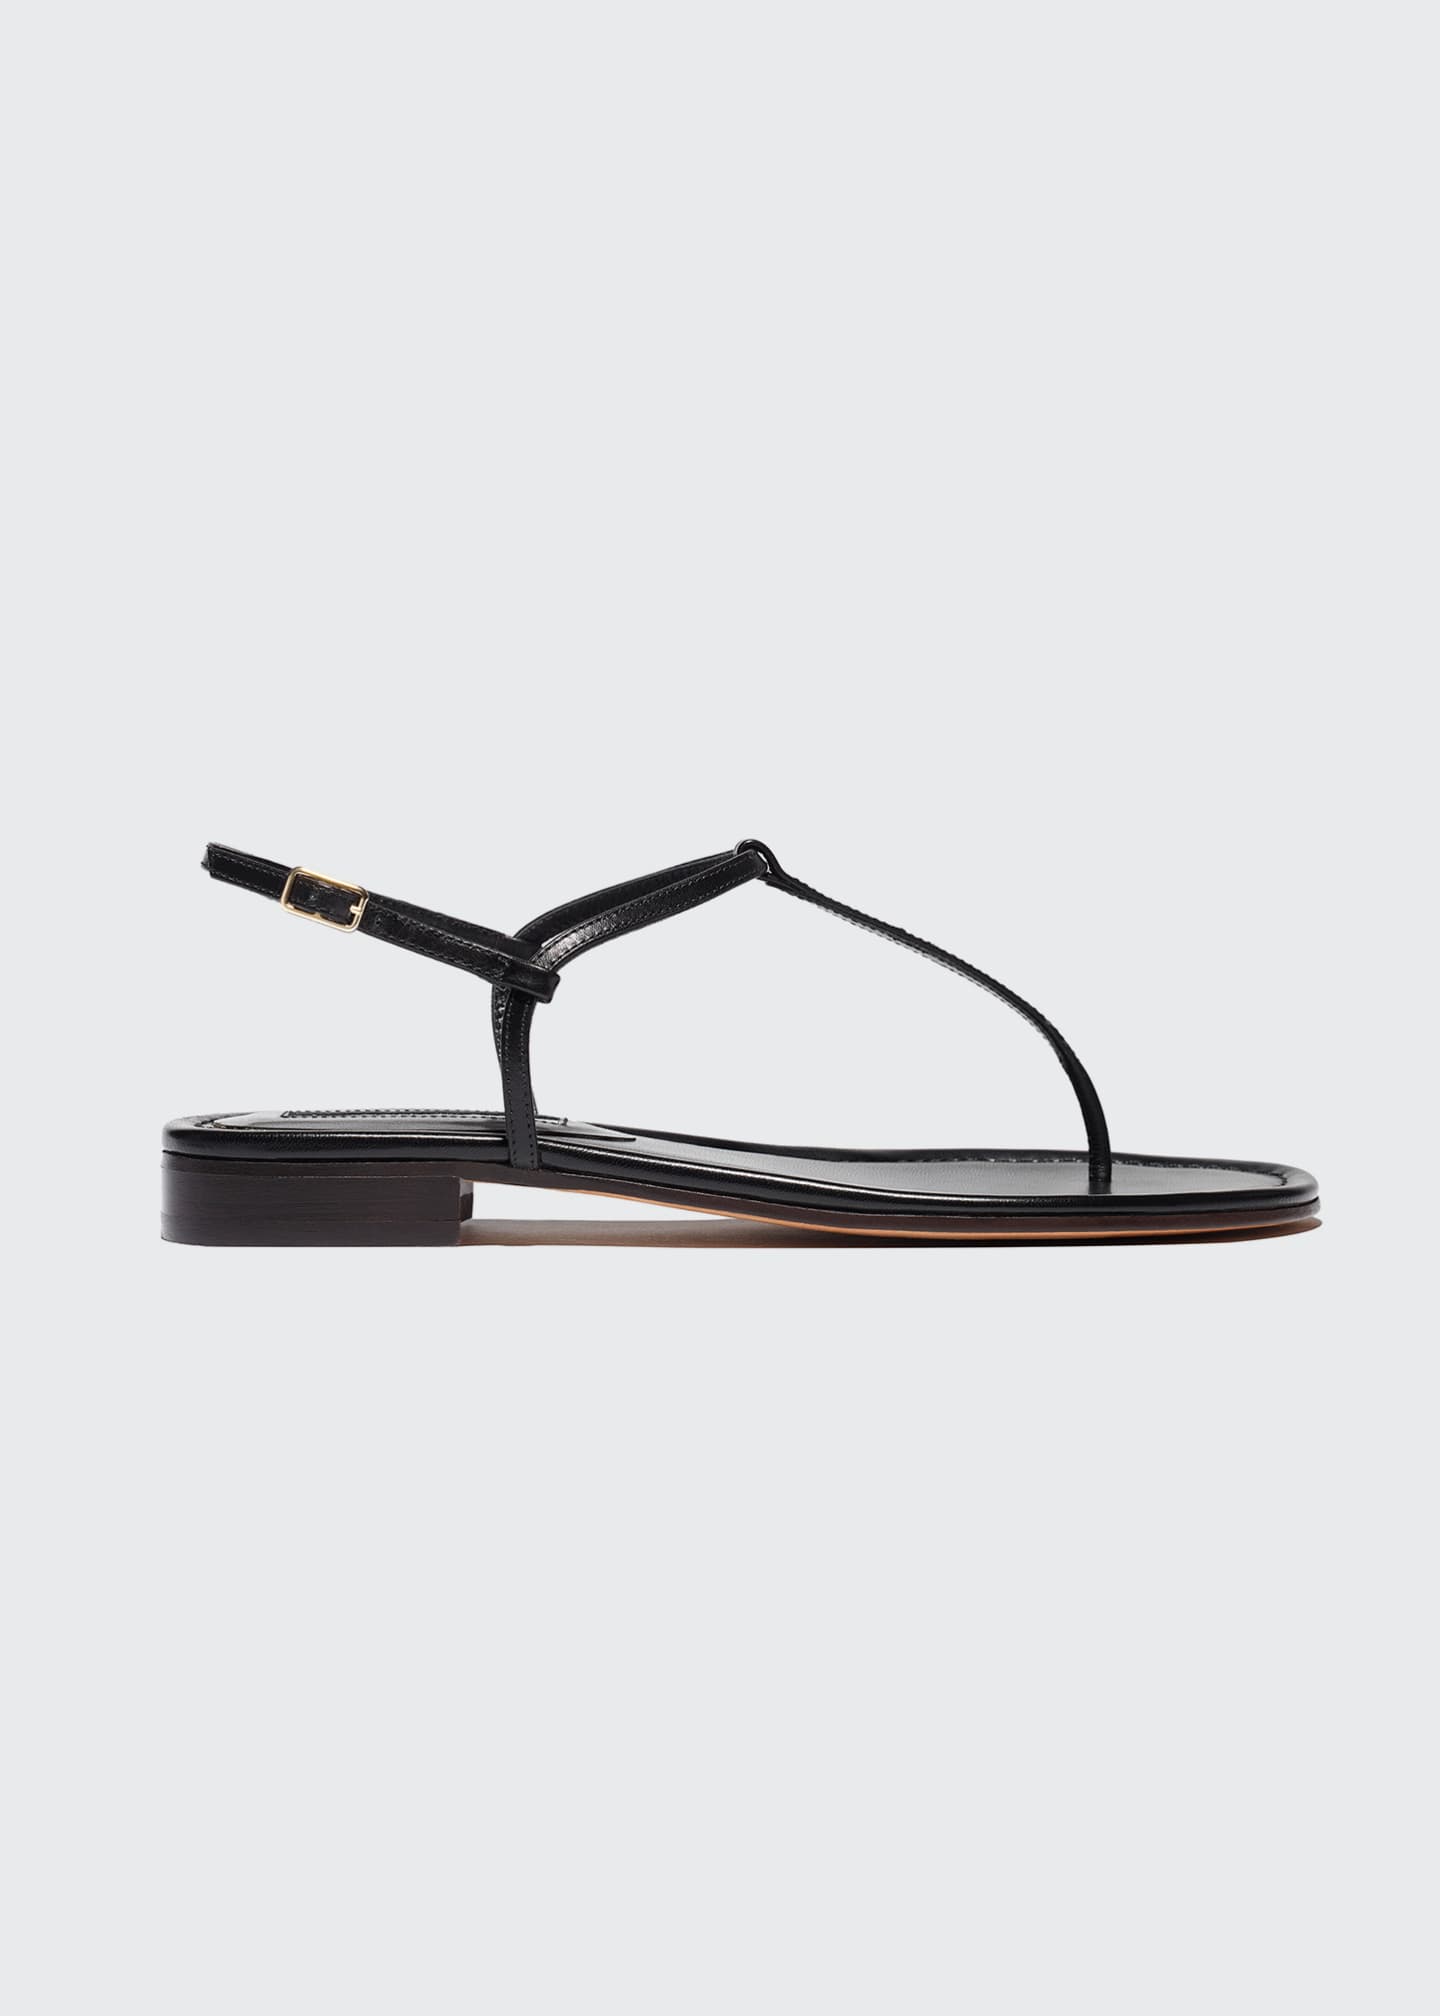 Emme Parsons Cecilia Leather Thong Sandals - Bergdorf Goodman